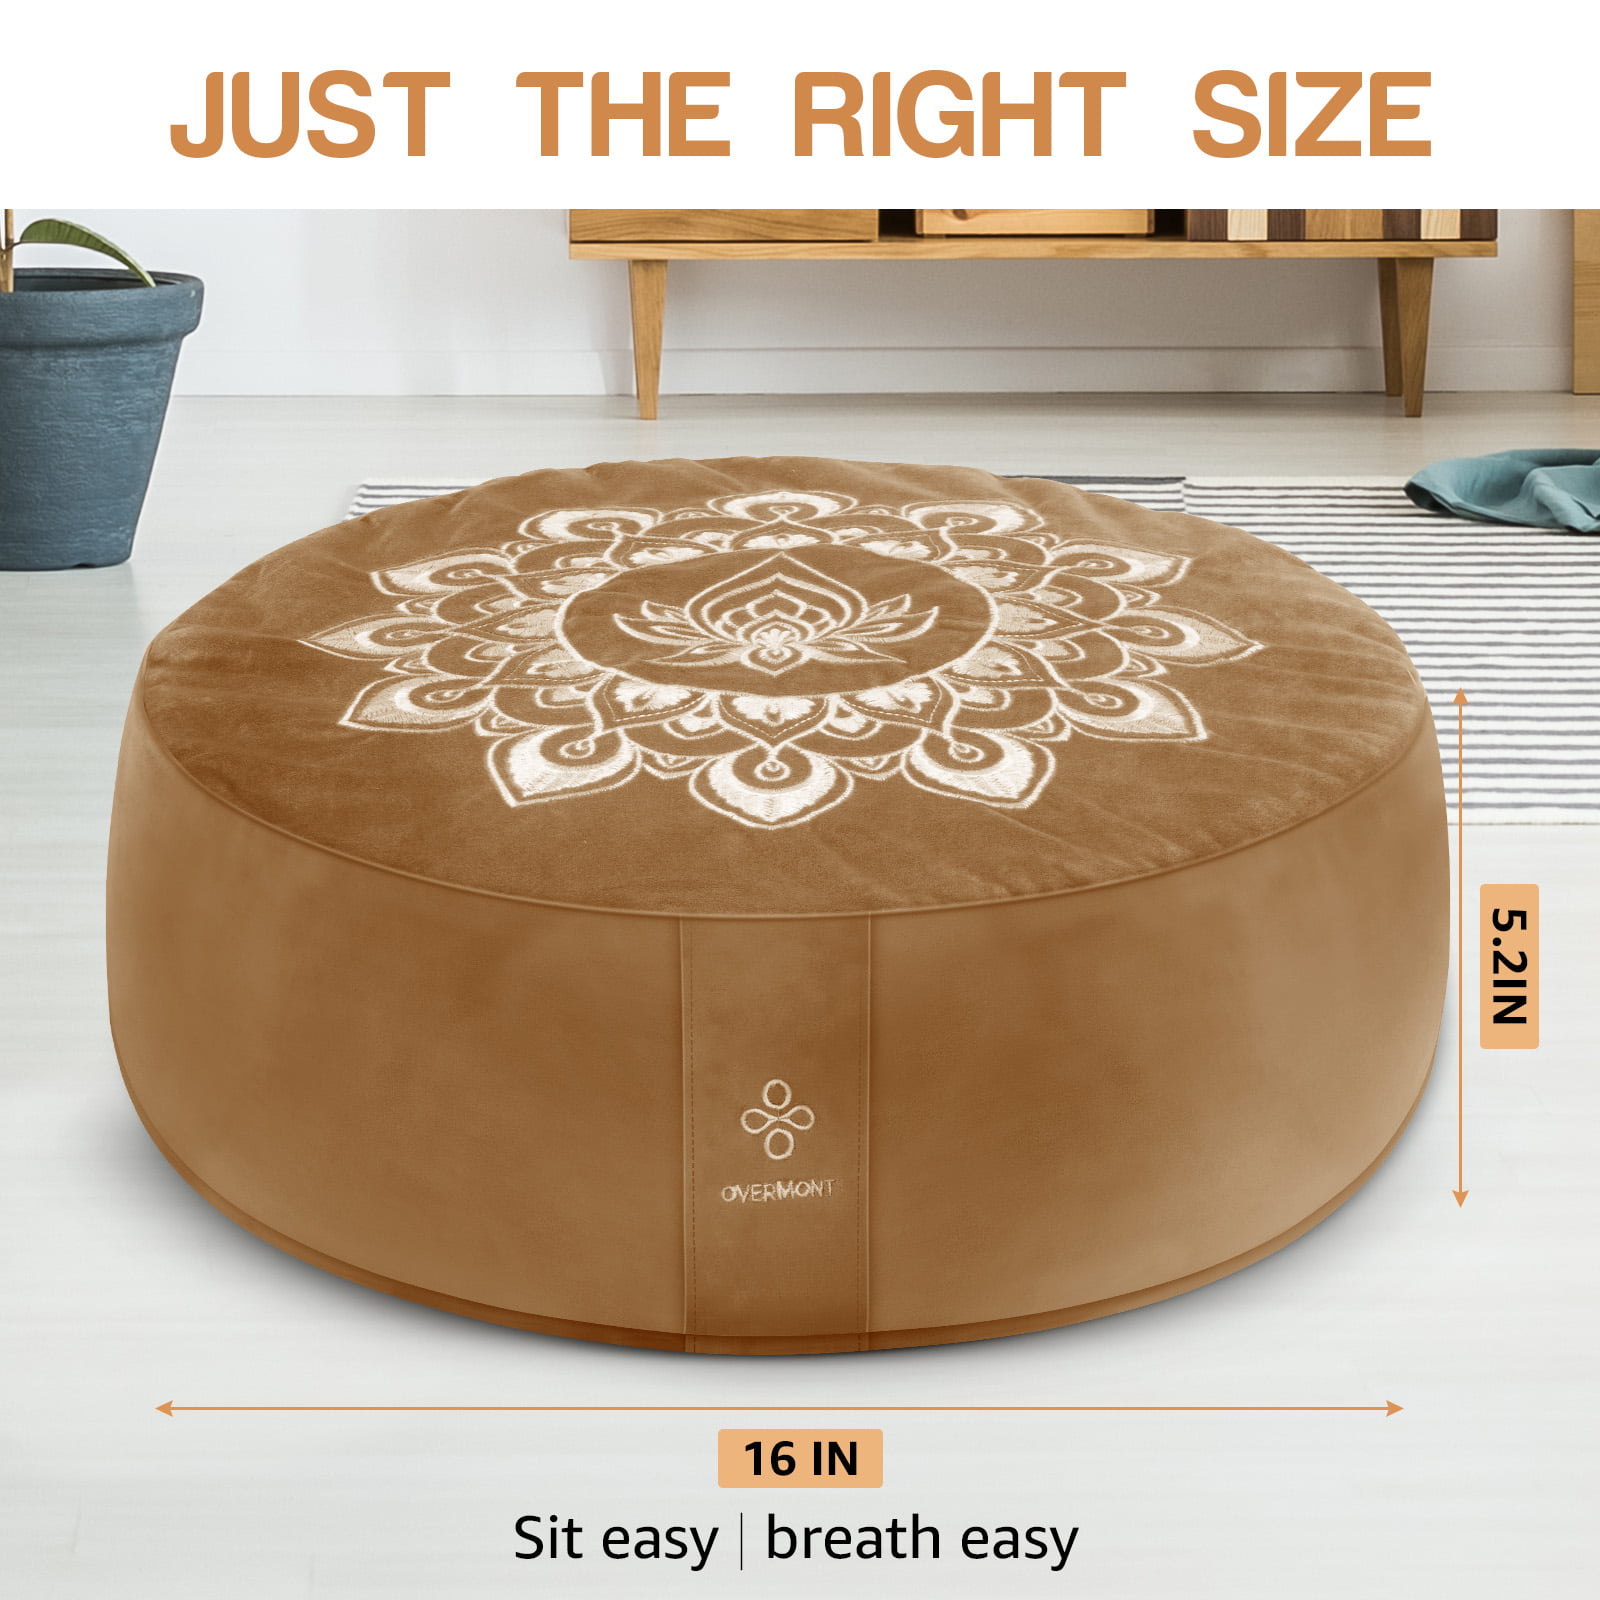 Zafu Accessories Decor Buckwheat Yoga Cushion Overmont Meditation Cushion Large Velvet Floor Pillow with Extra Cover 15.4x15.4x5 for Sitting on Floor 